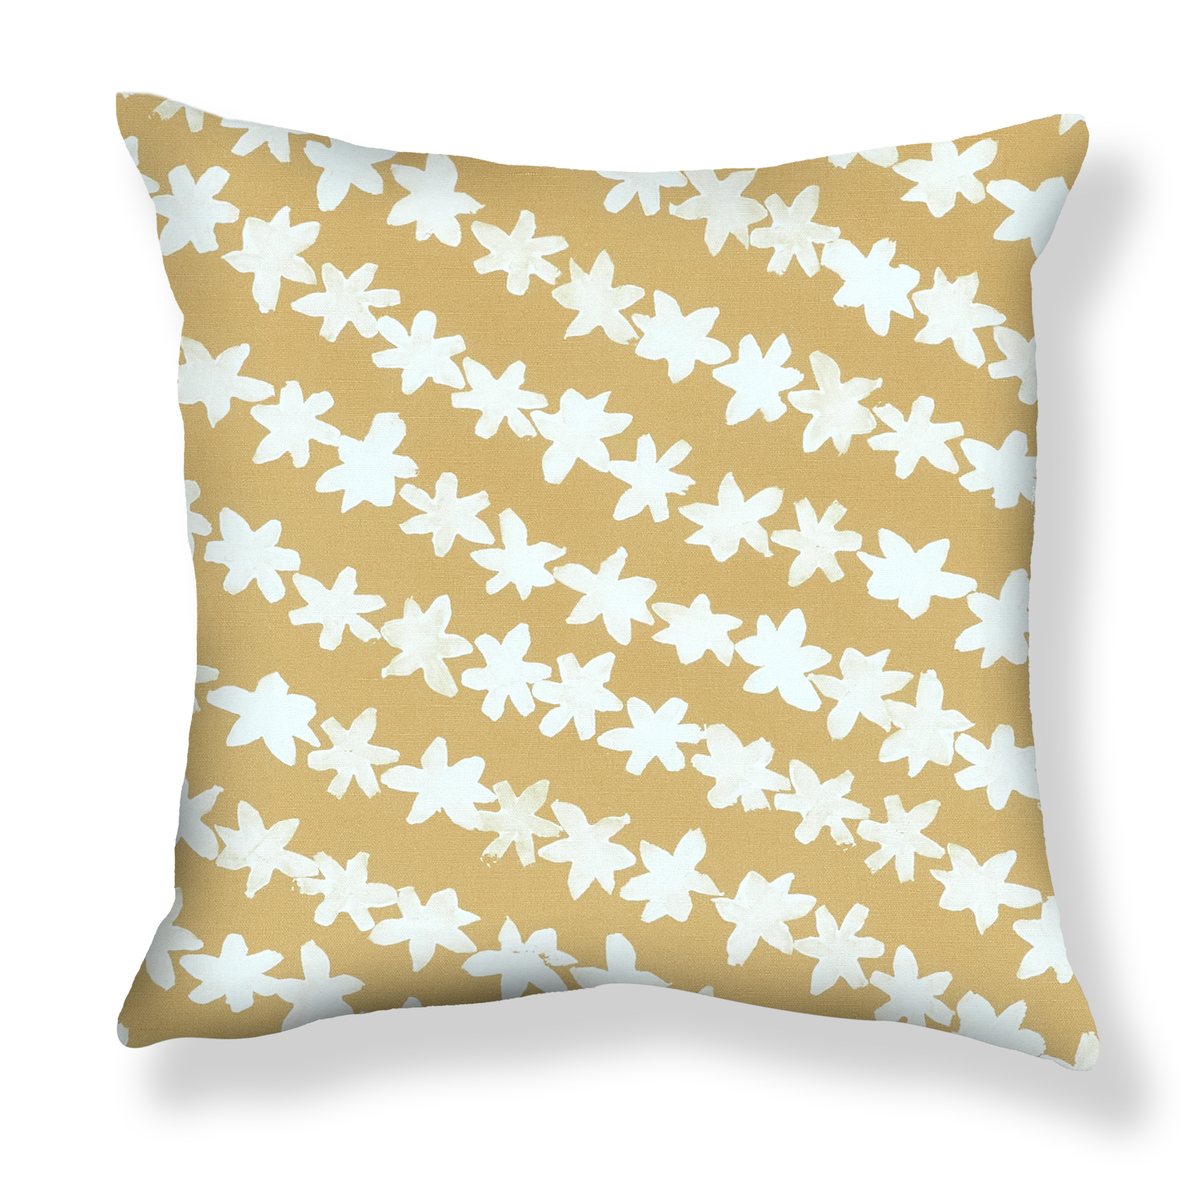 Stamped Garland Pillow in Goldenrod